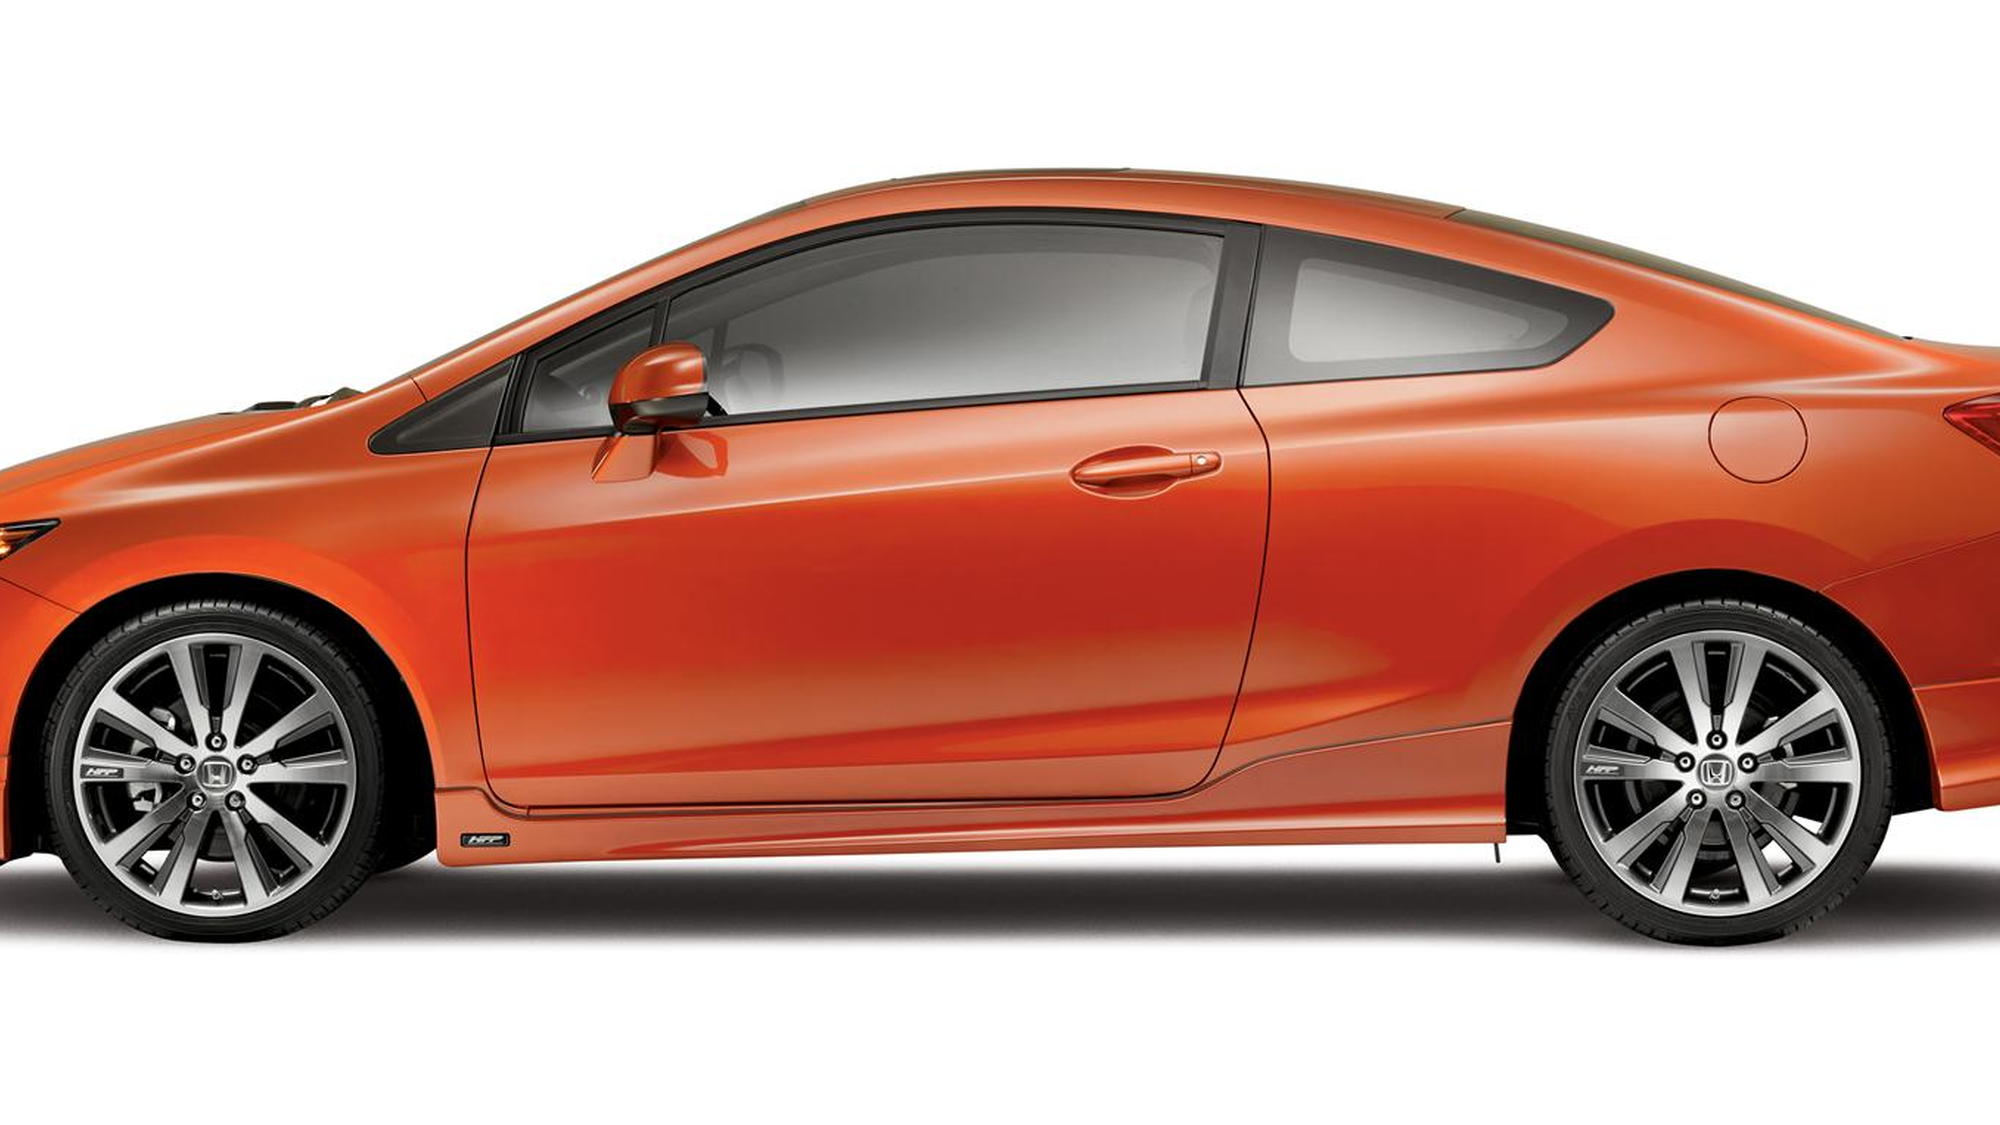 2012 Honda Civic Si with HFP package